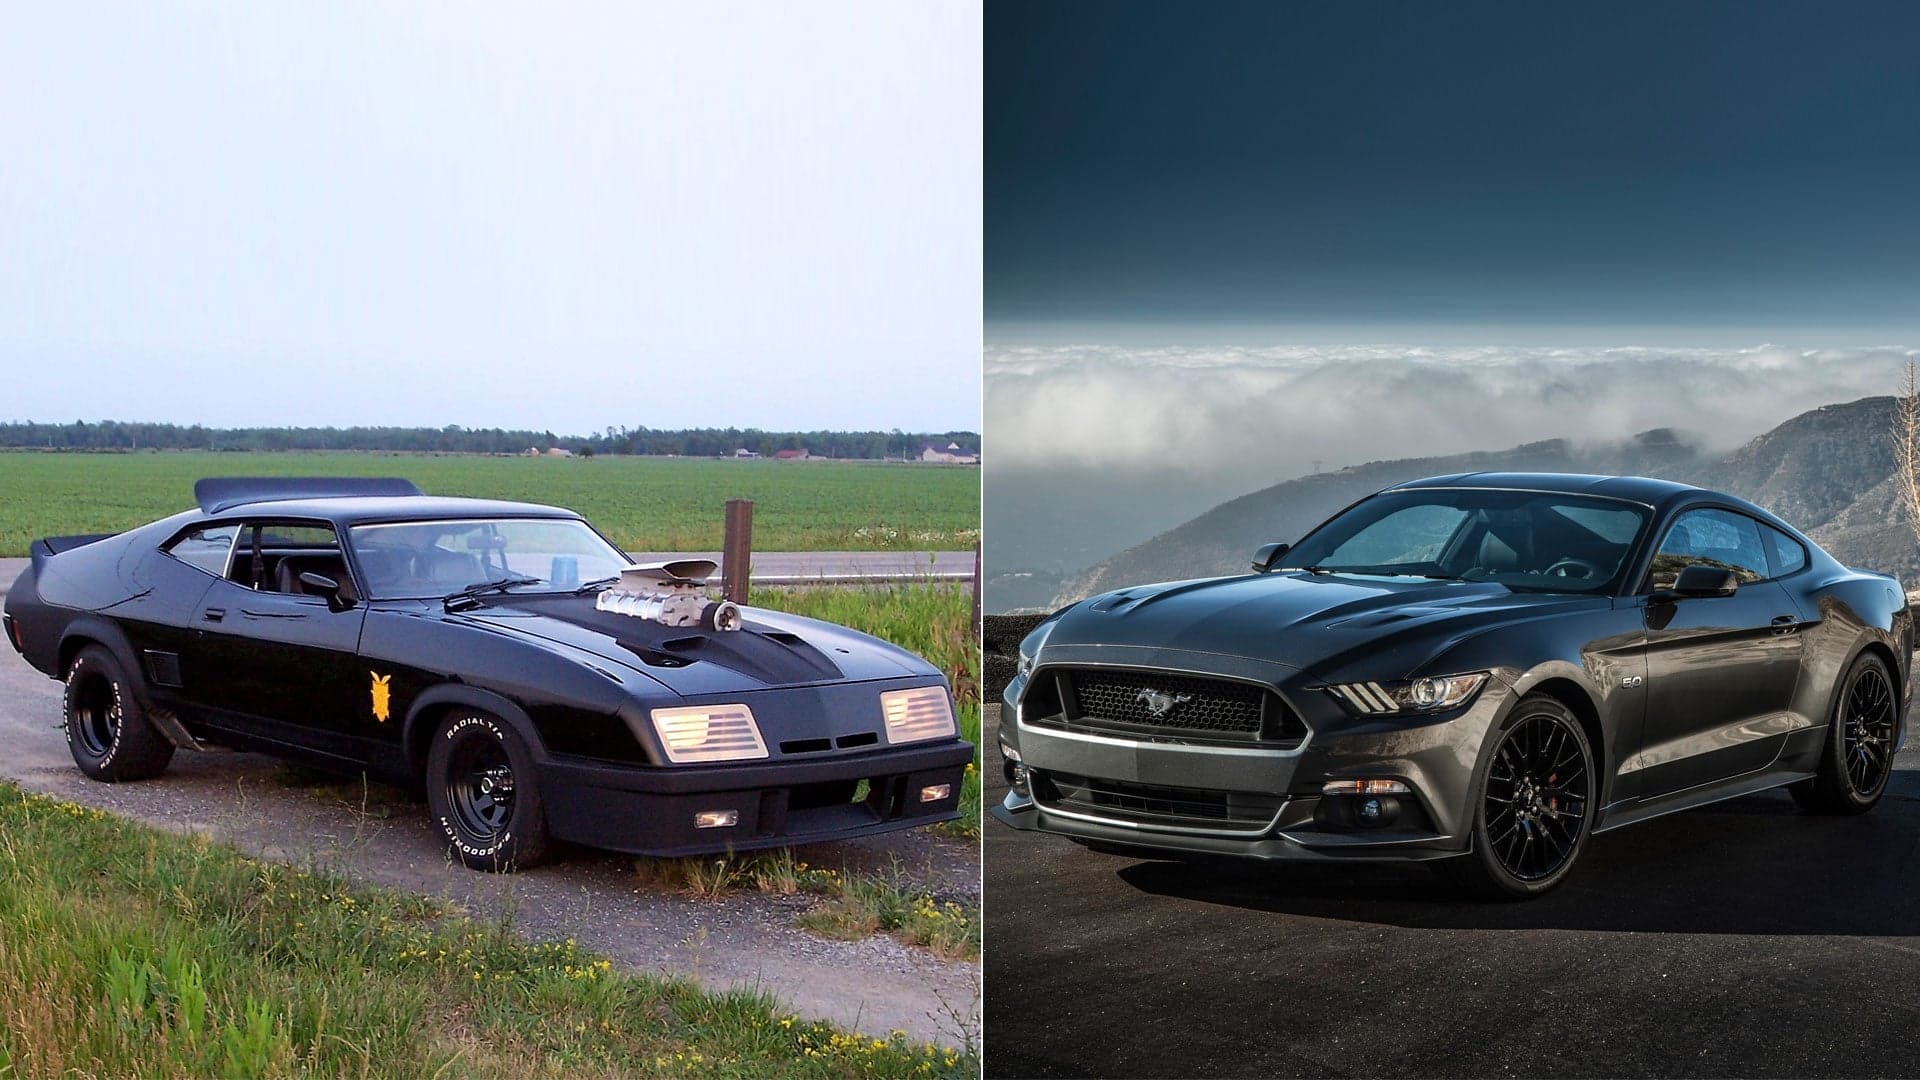 The Ford Mustang is Australia’s New Mad Max Interceptor